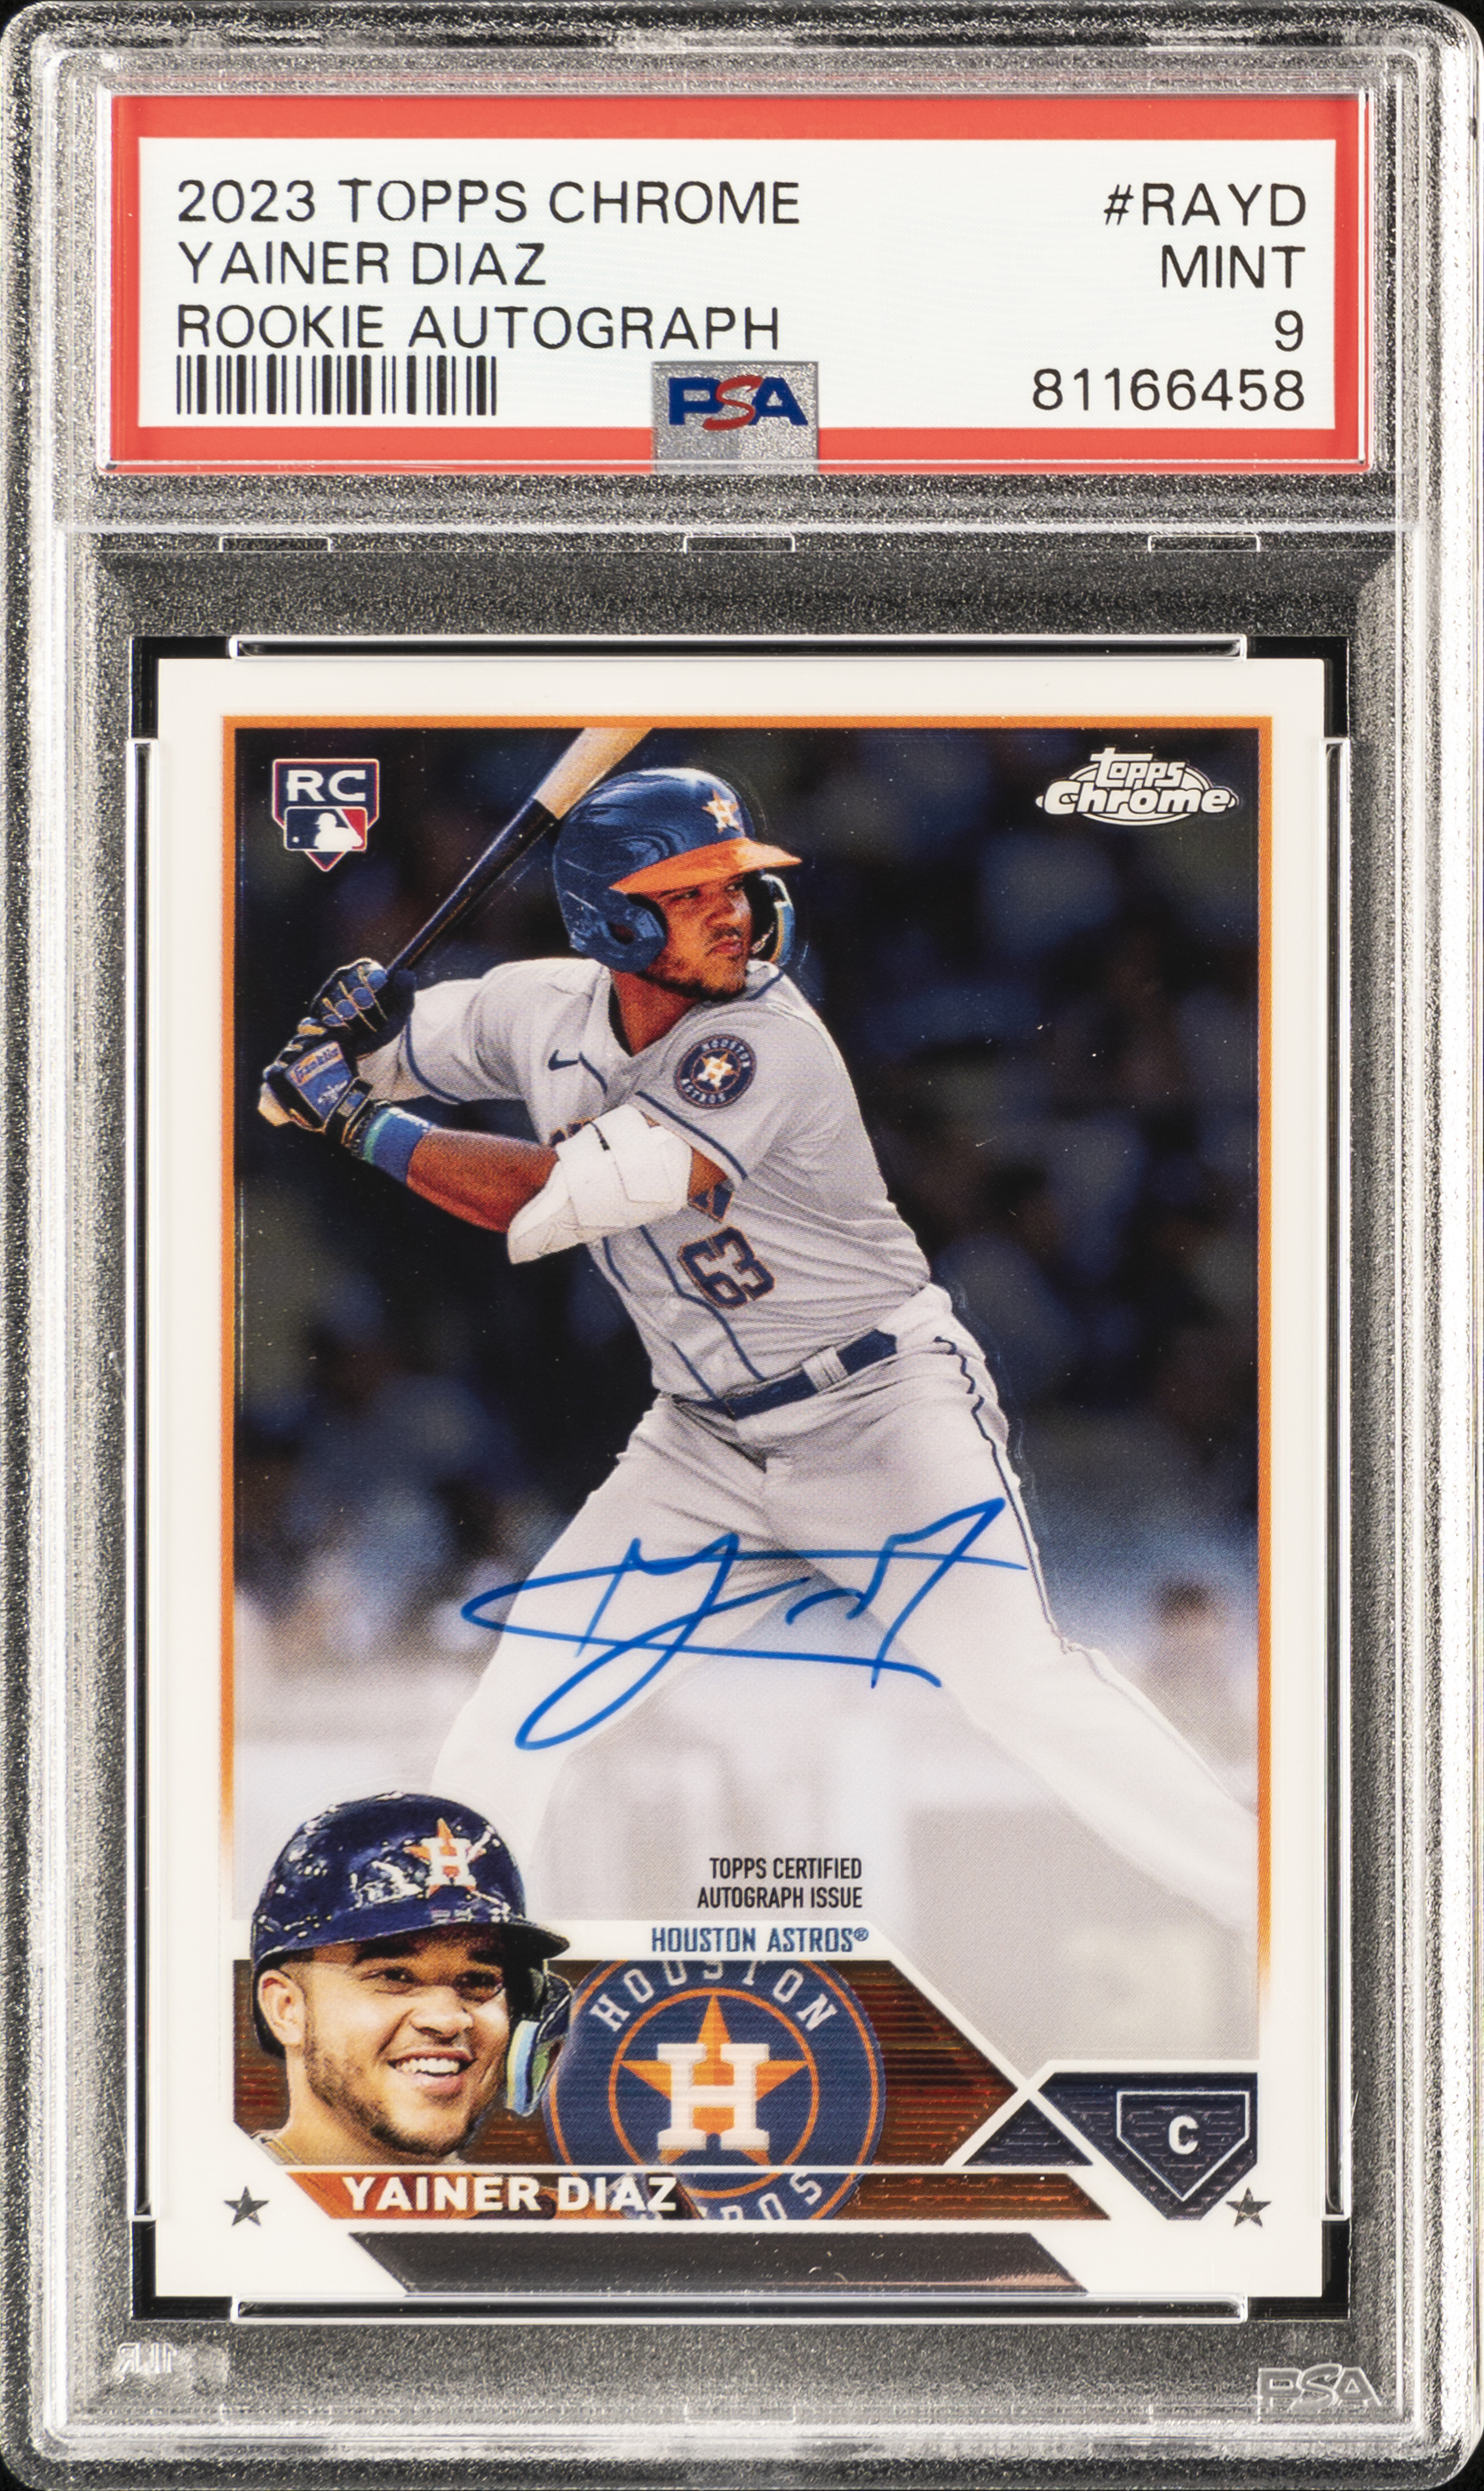 2023 Topps Chrome Rookie Autograph #RAYD Yainer Diaz Signed Rookie Card – PSA MINT 9